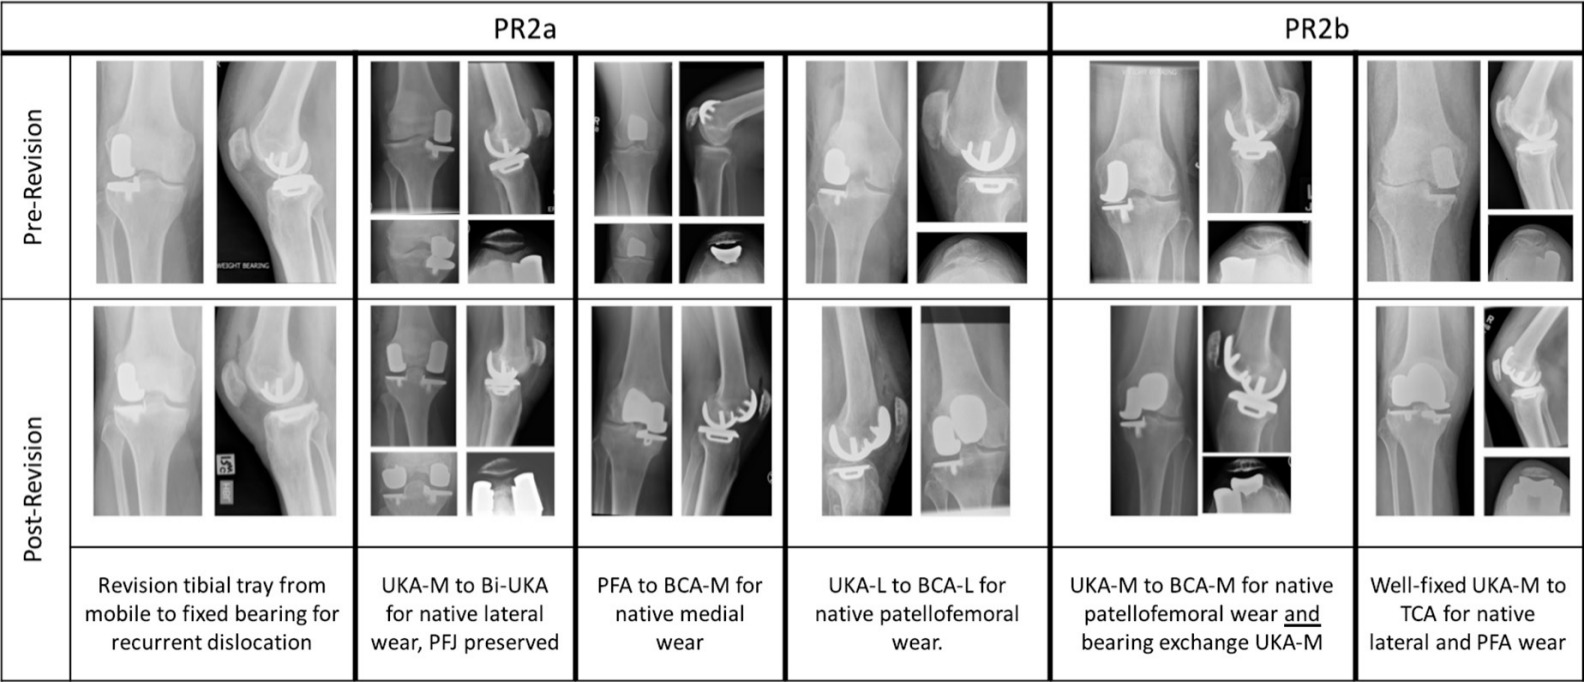 Fig. 2 
          Radiographic examples of partial revision two (PR2) procedures. BCA-L, lateral bicompartmental arthroplasty; BCA-M, medial bicompartmental arthroplasty; Bi-UKA, bi-unicondylar athroplasty; PFA, patellofemoral arthroplasty; PTCA, tricompartmental arthroplasty; UKA-L, lateral unicompartmental arthroplasty; UKA-M, medial unicompartmental arthroplasty.
        